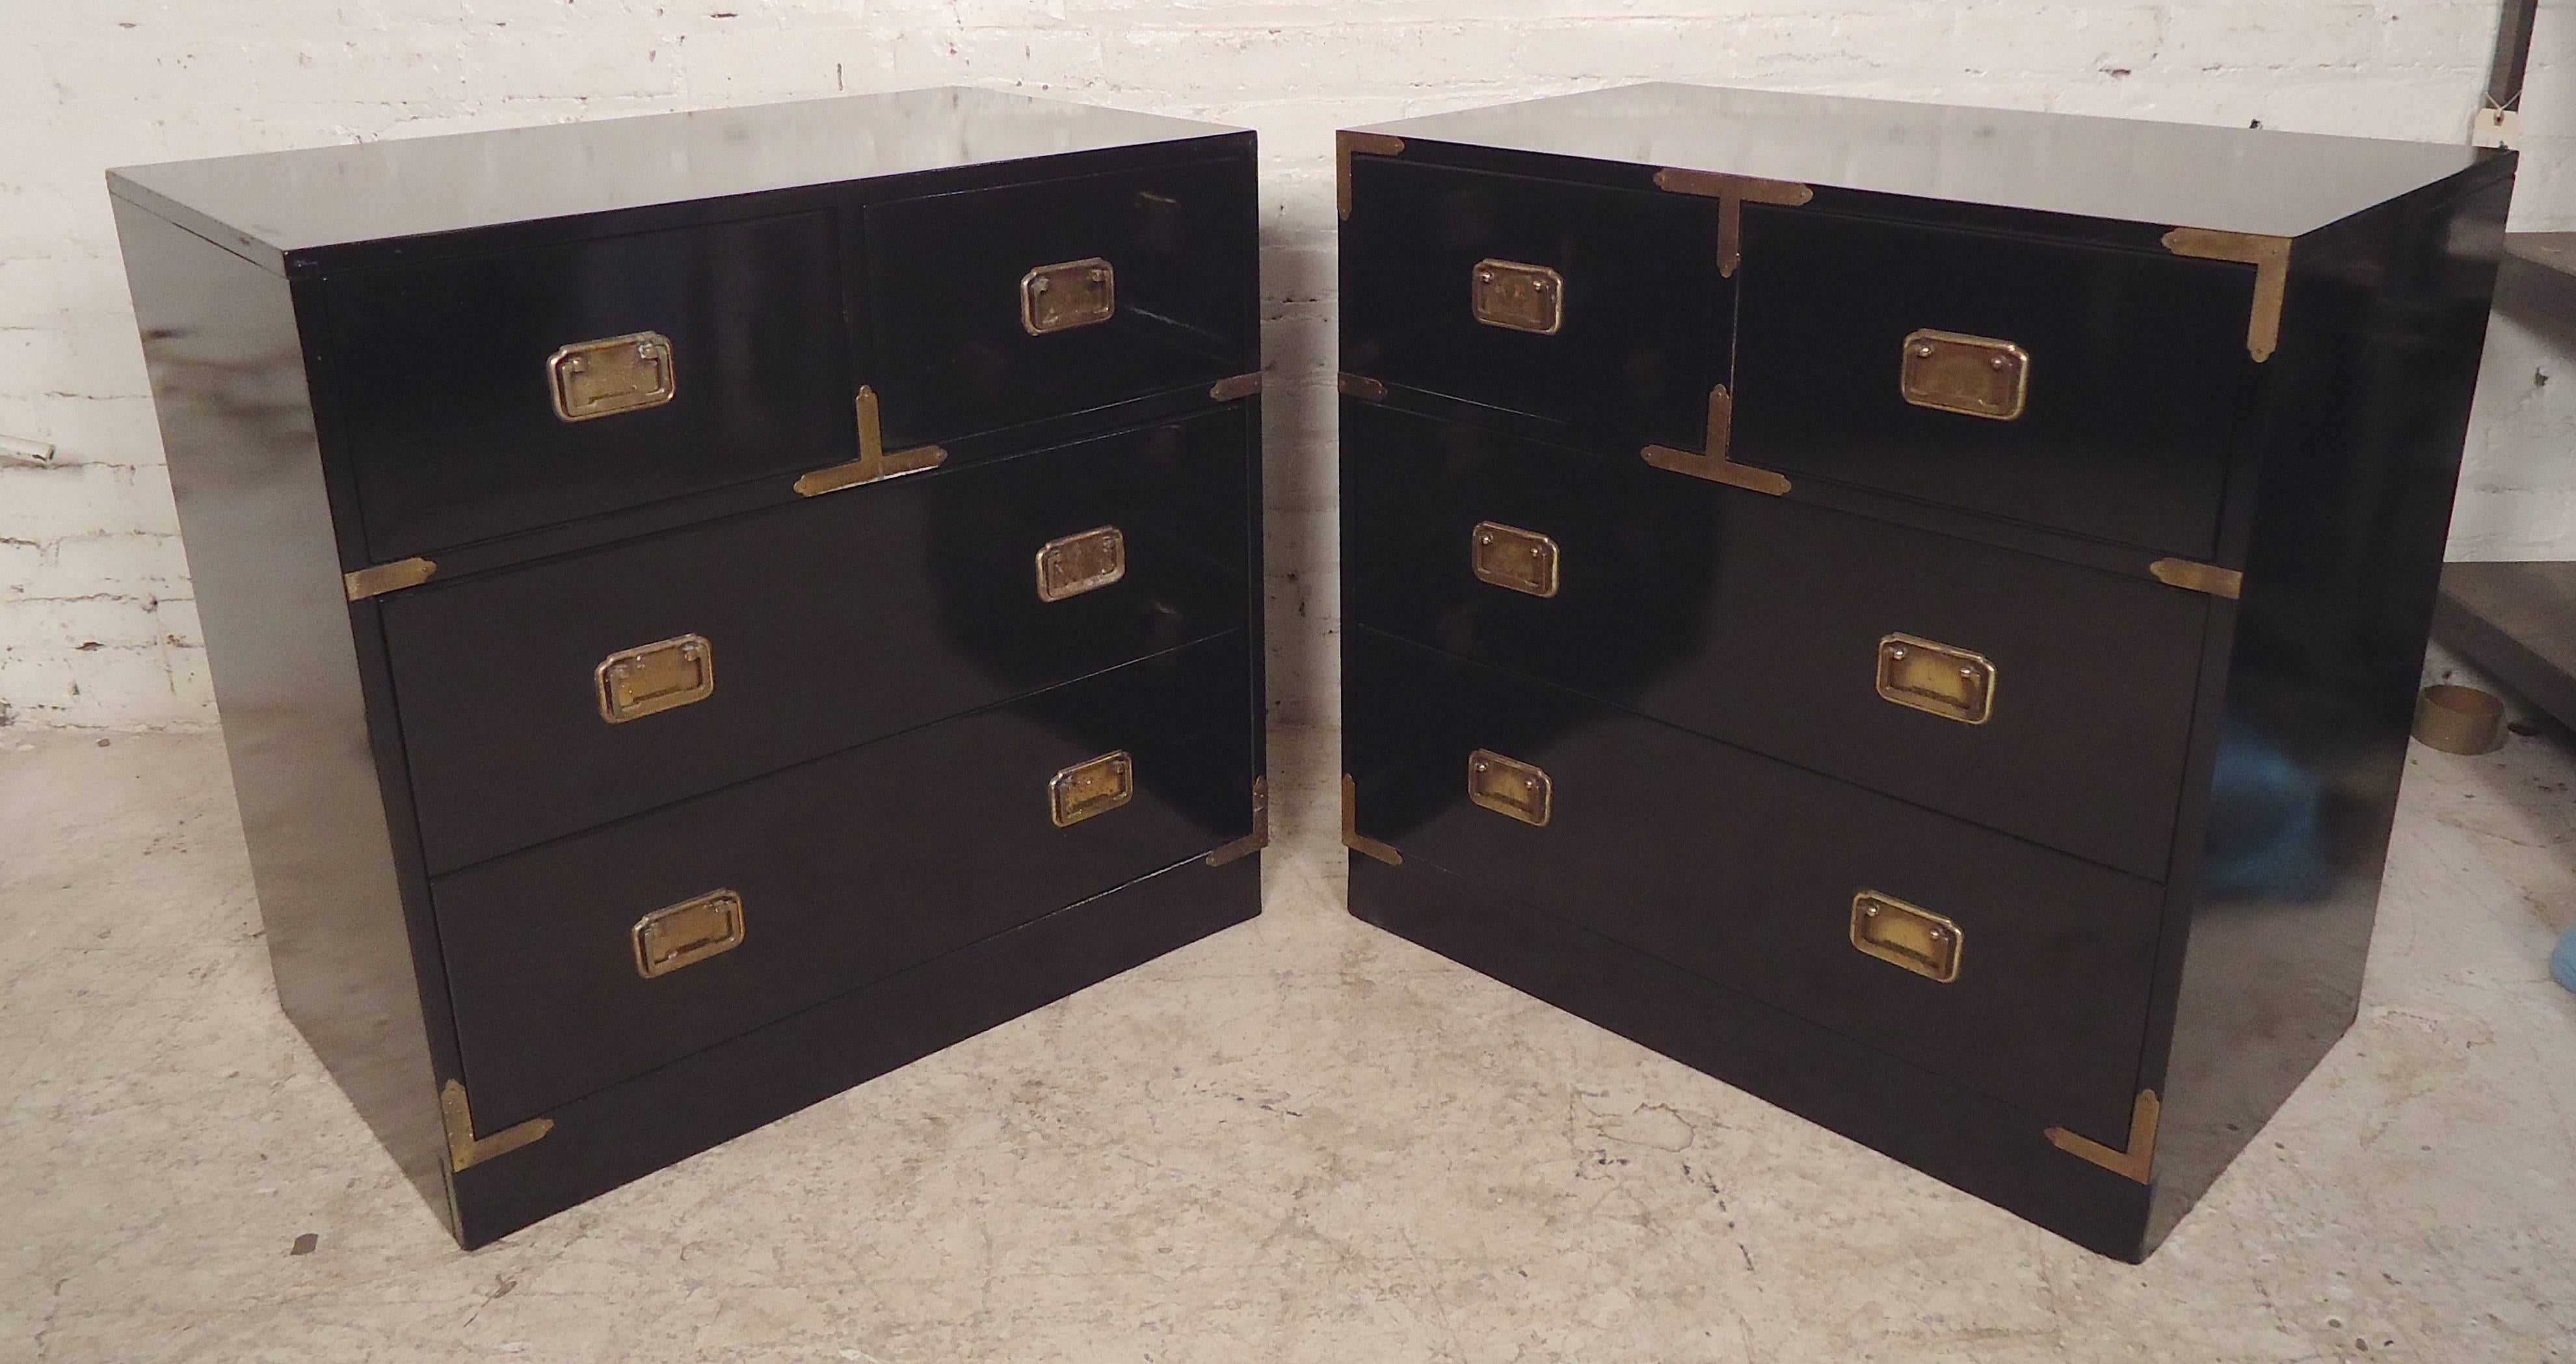 Refinished chest of drawers with brass hardware. Attractive Campaign style with a polished black finish.

(Please confirm item location NY or NJ with dealer).
 